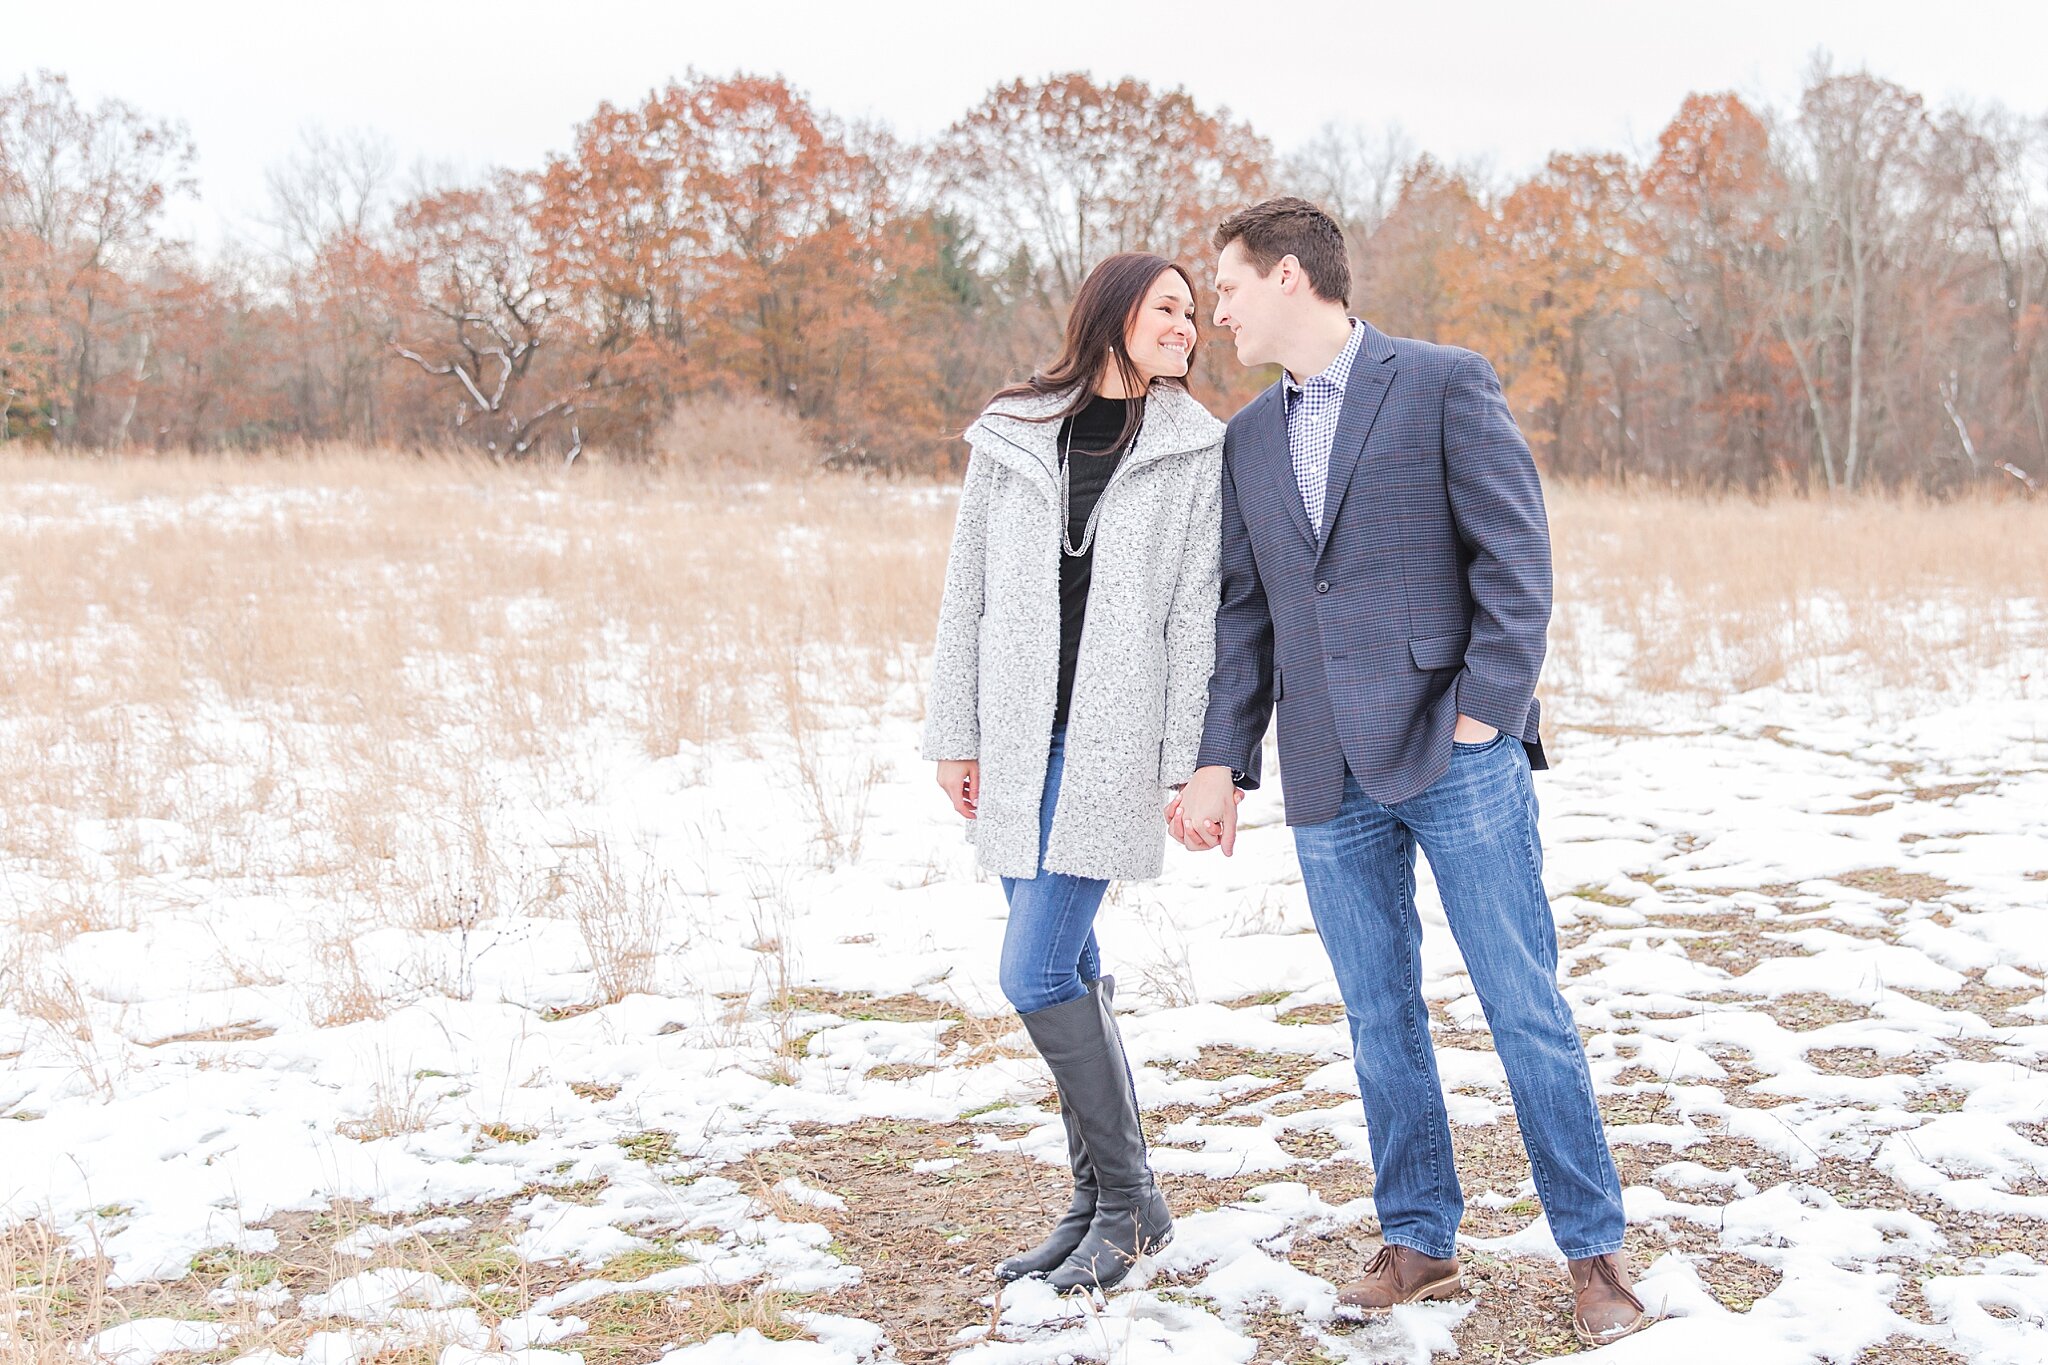 detroit-wedding-photographer-winter-engagement-photos-at-stony-creek-metropark-in-shelby-twp-mi-by-courtney-carolyn-photography_0018.jpg